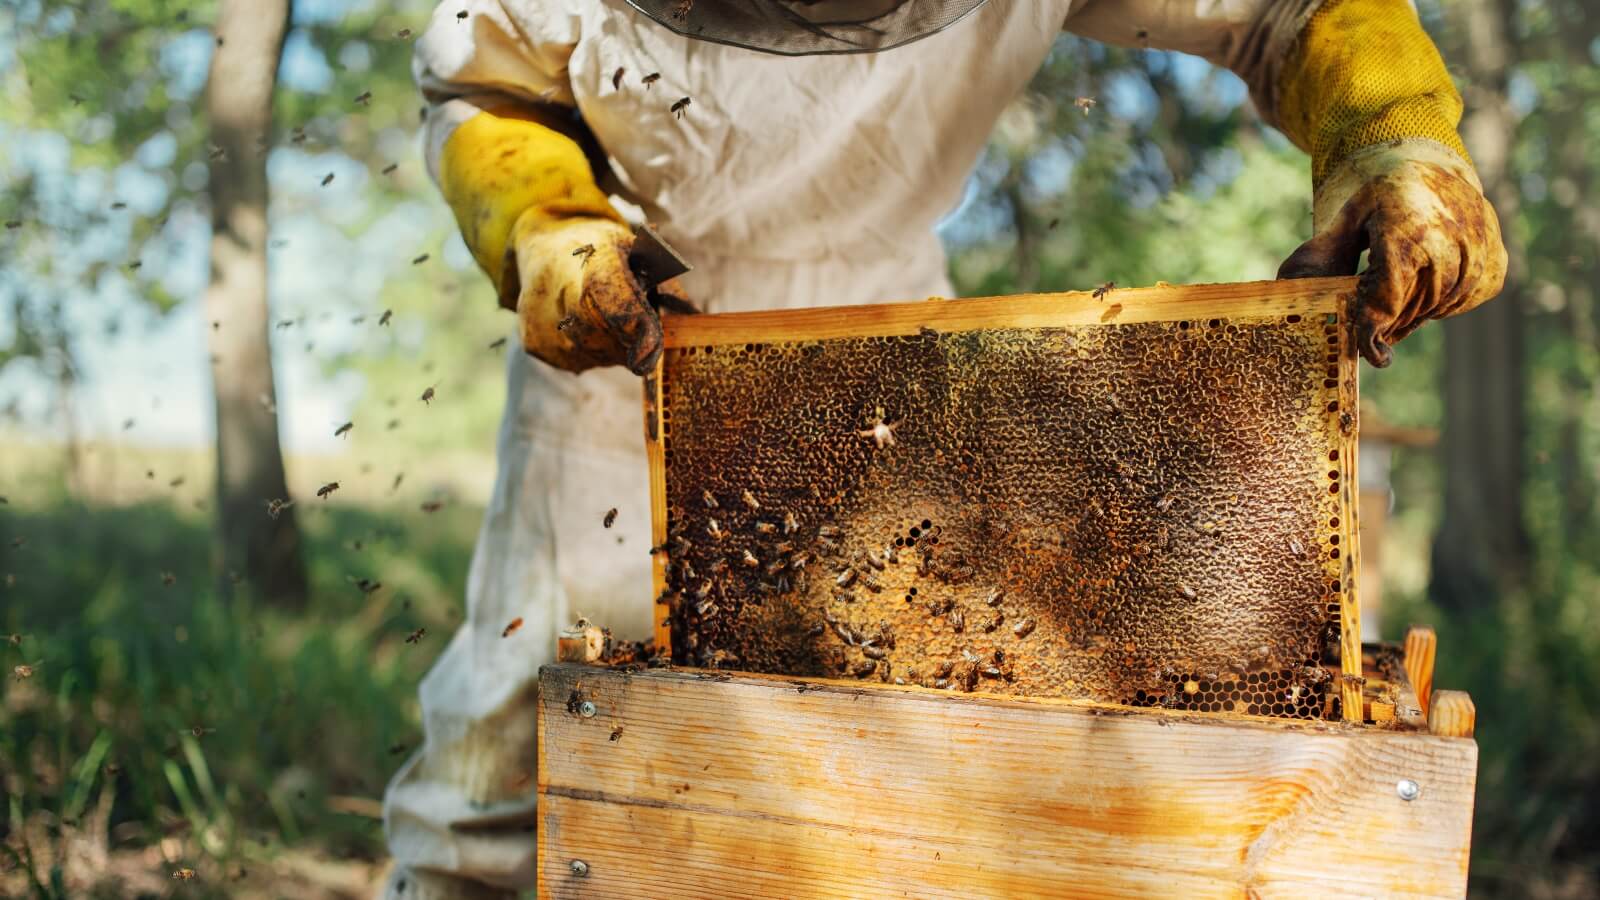 A beekeeper lifts a beehive out of a wooden box, as bees fly around